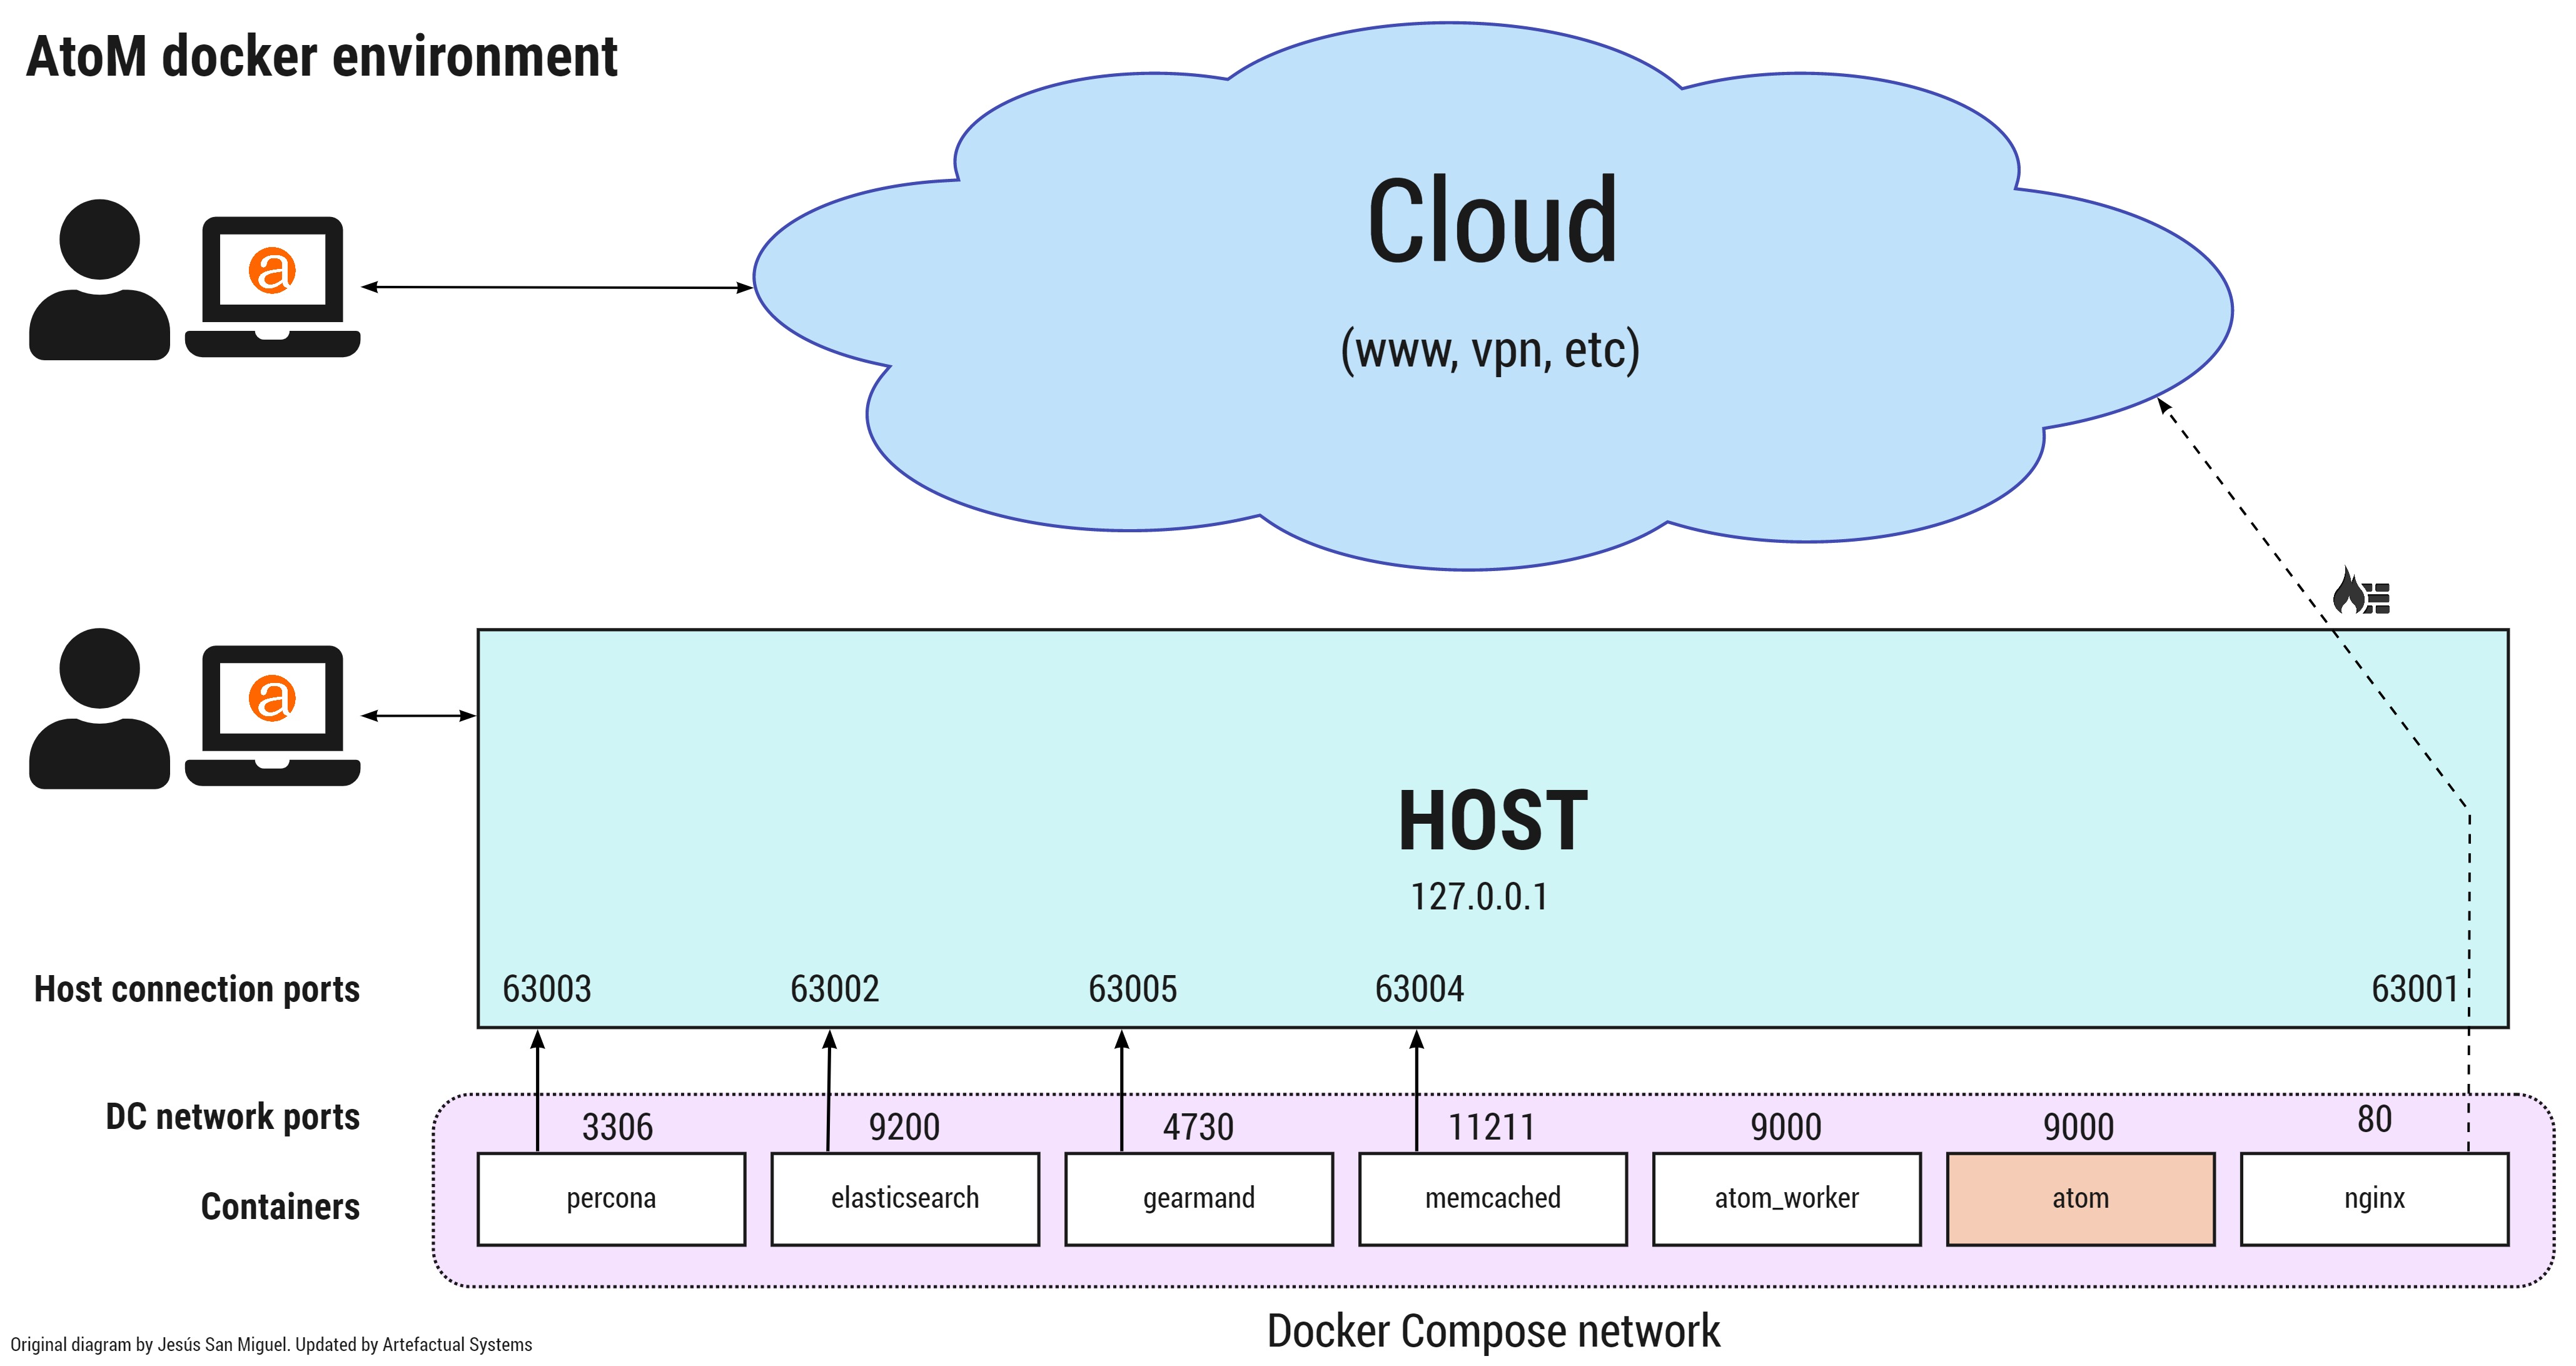 A representation of the AtoM Docker containers and ports